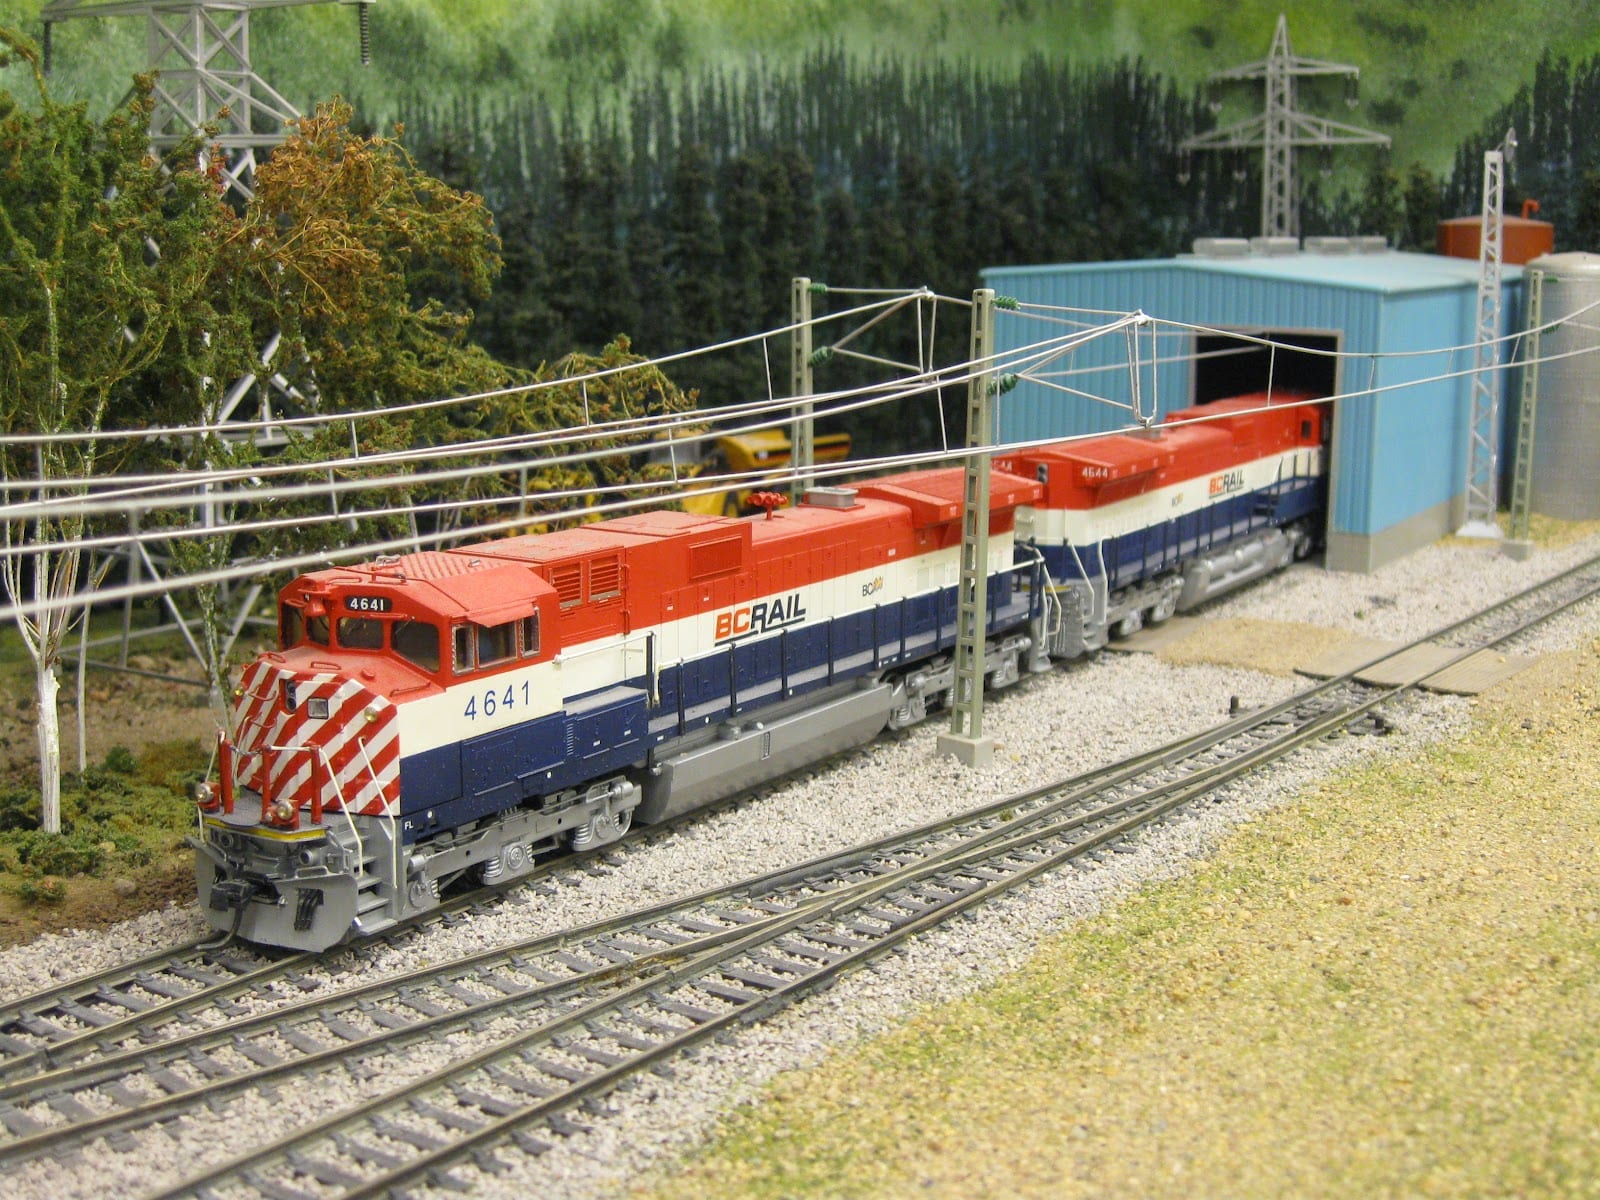 "The Northland Route" HO Scale Layout